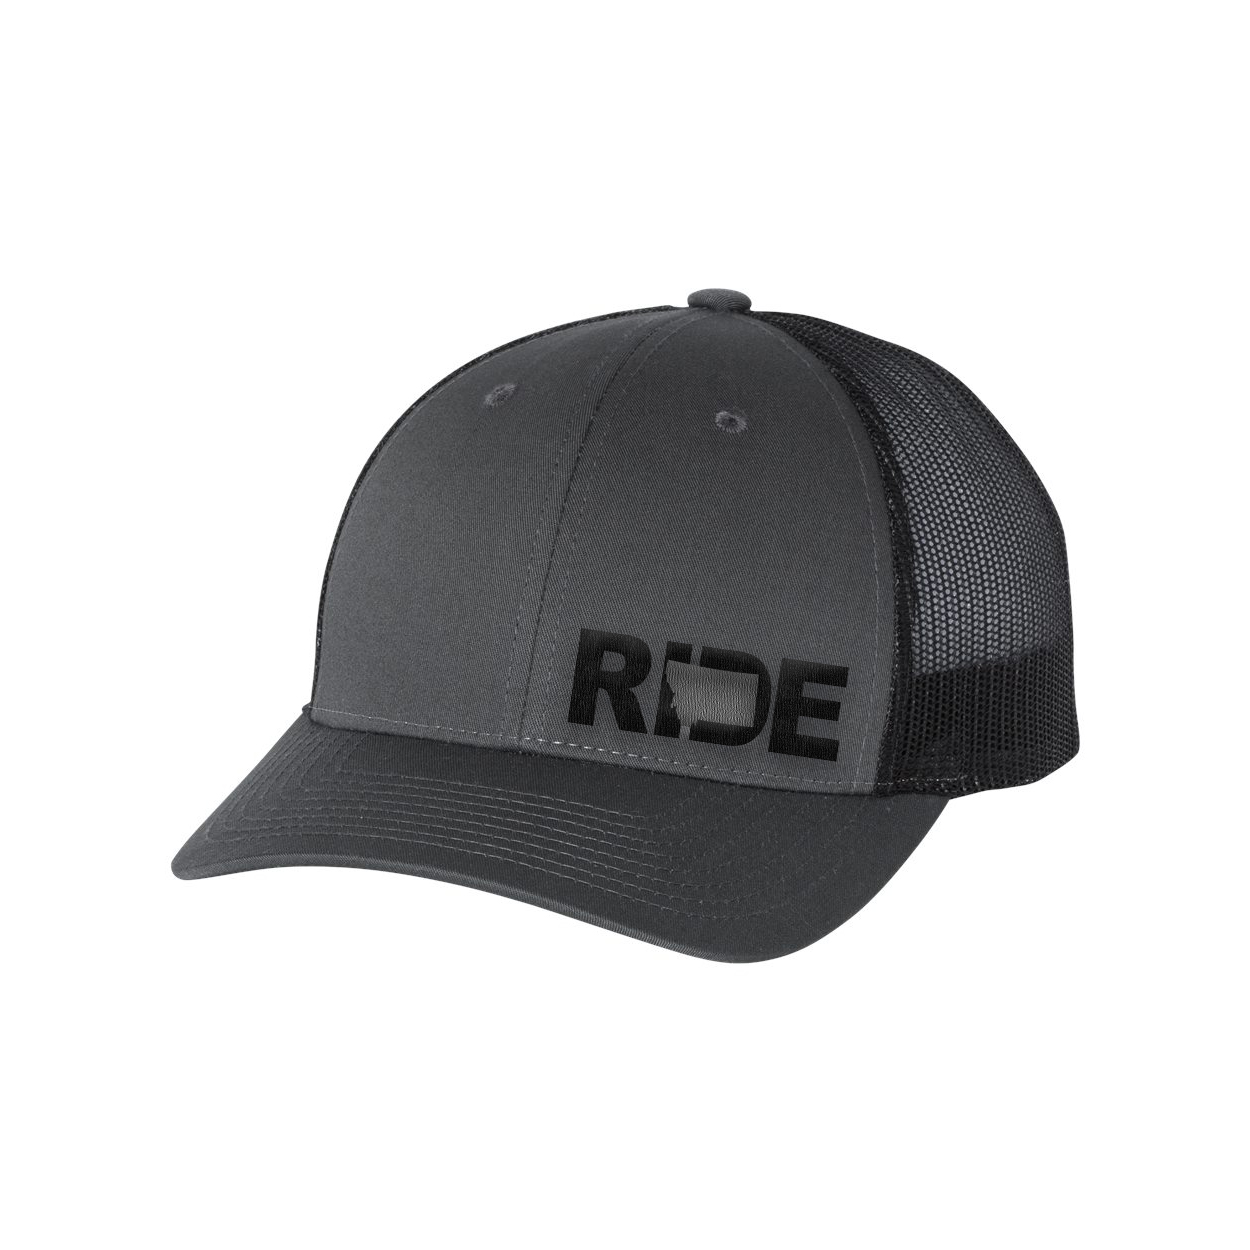 Ride Montana Night Out Embroidered Snapback Trucker Hat Gray/Black